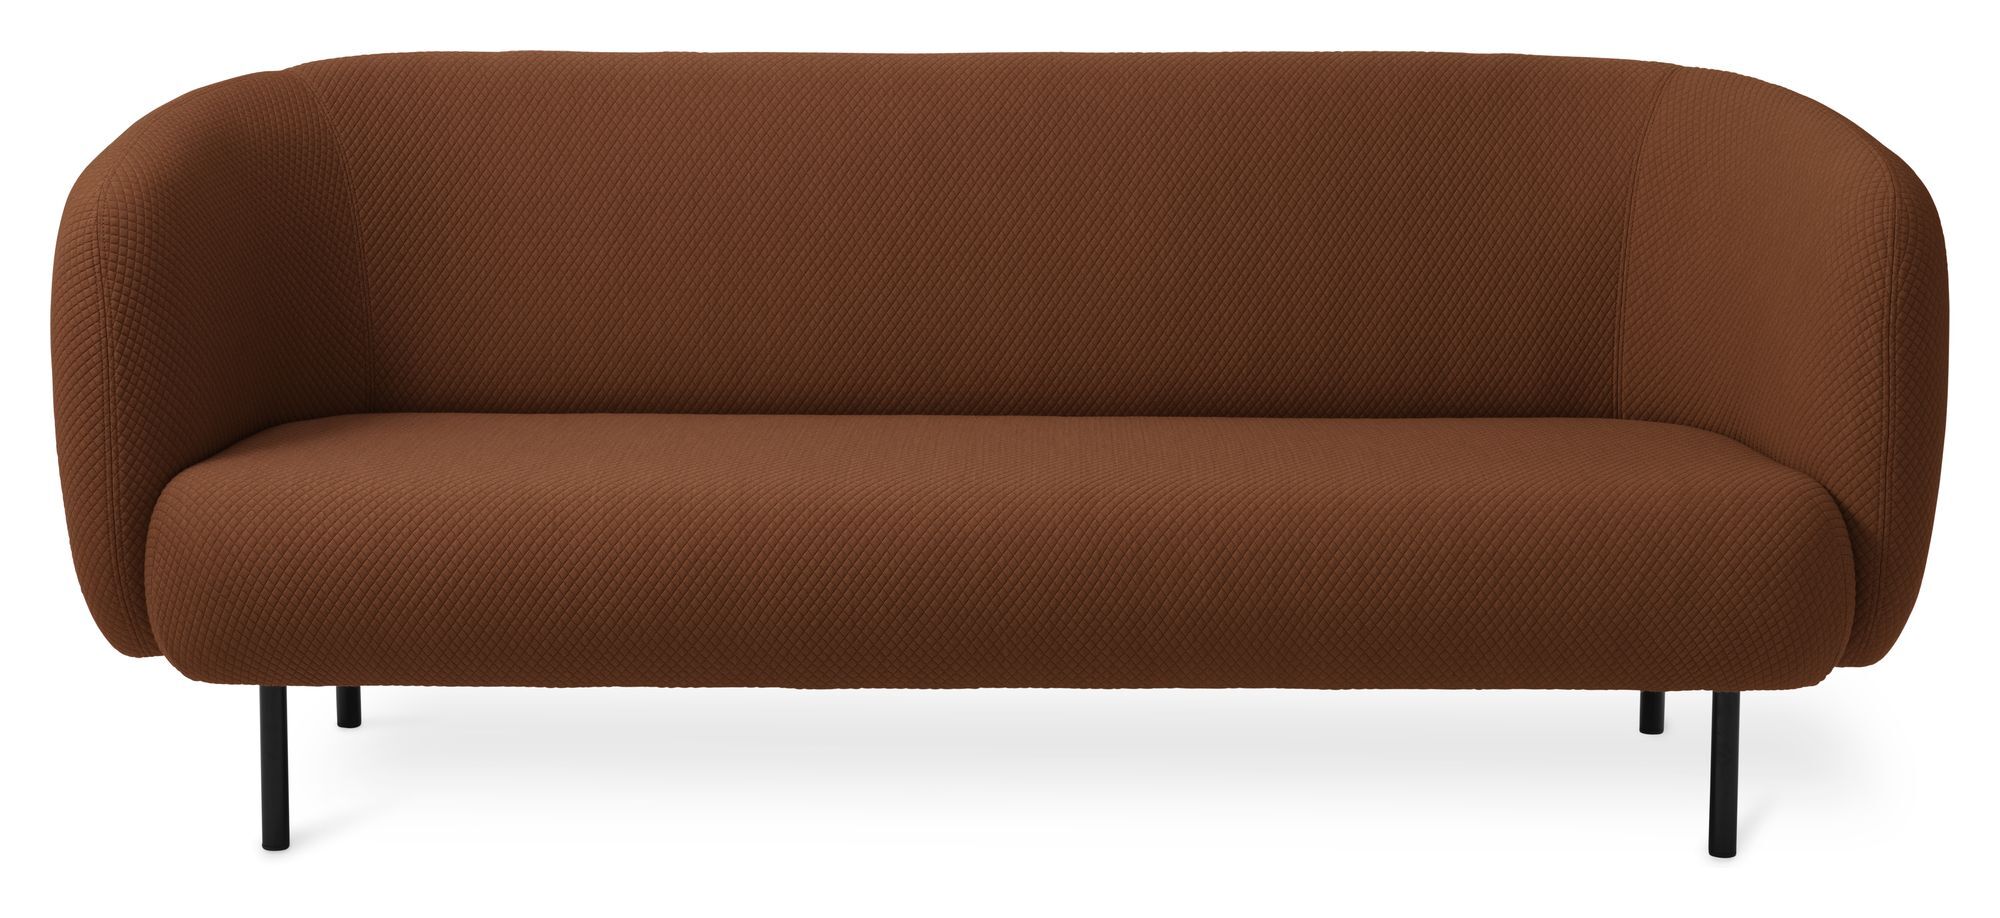 Warm Nordic CAPE 3-pers. Sofa, Spicy Brown   Unoliving